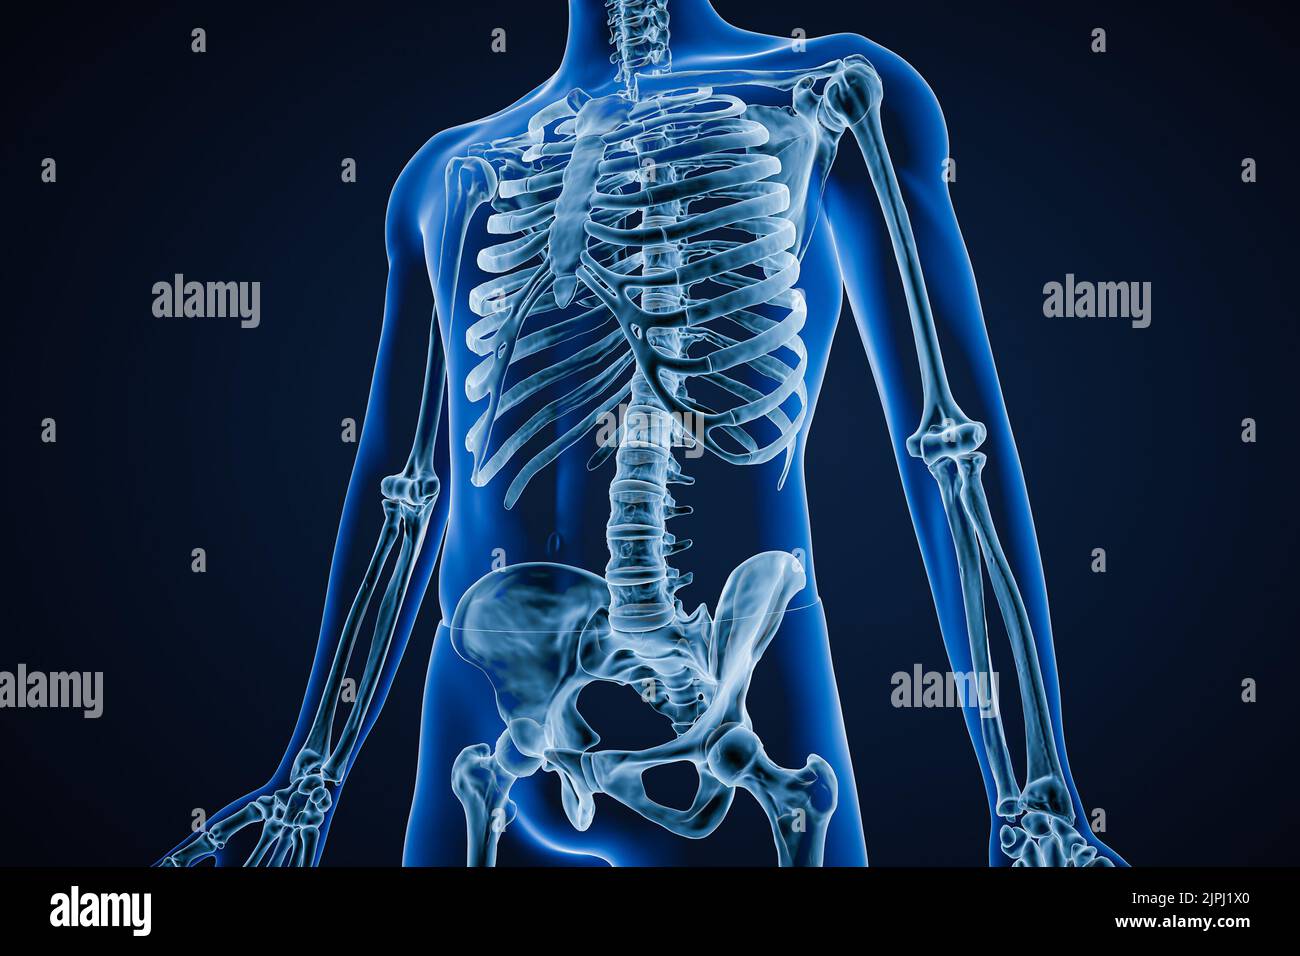 Anterior or front view of xray image of accurate human skeletal system or skeleton with adult male body contours on blue background 3D rendering illus Stock Photo